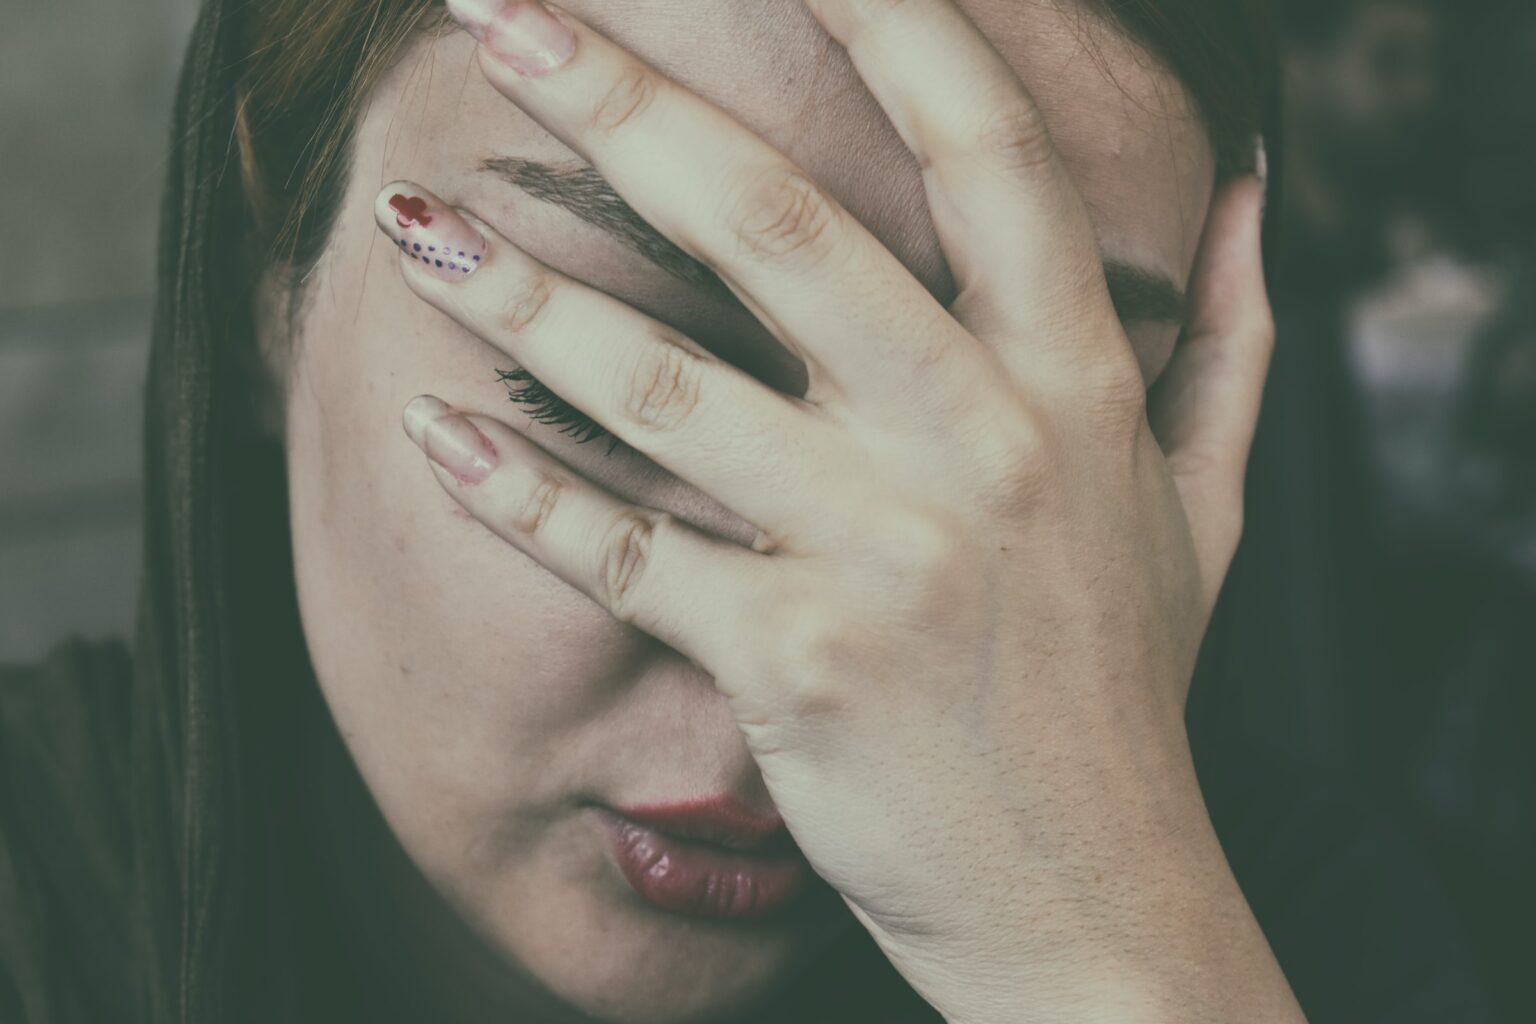 A woman with painted nails covering her face with one hand, displaying a sense of distress or fatigue after a long visit at the Dallas dentist office.